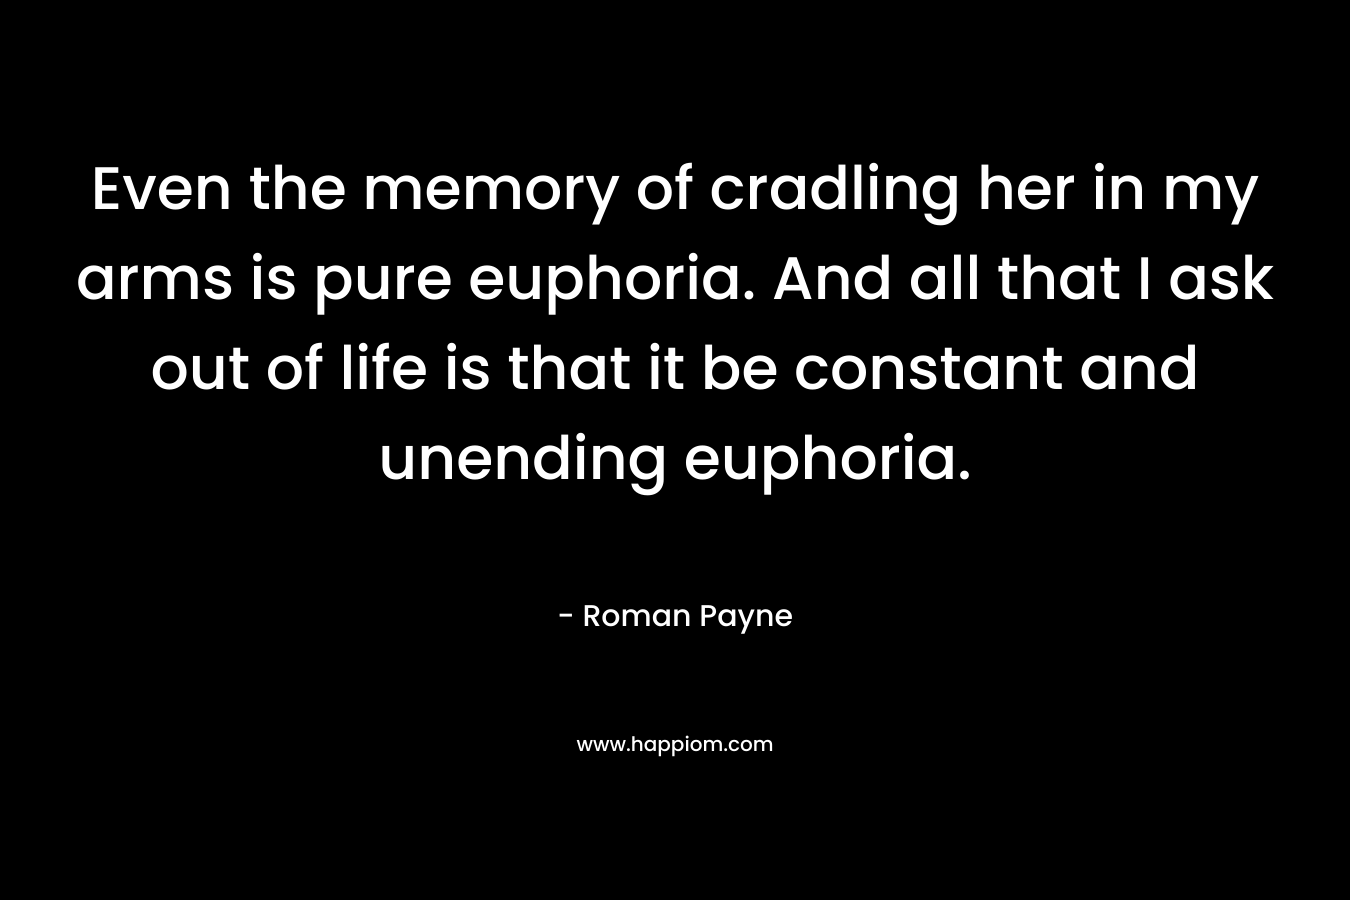 Even the memory of cradling her in my arms is pure euphoria. And all that I ask out of life is that it be constant and unending euphoria.